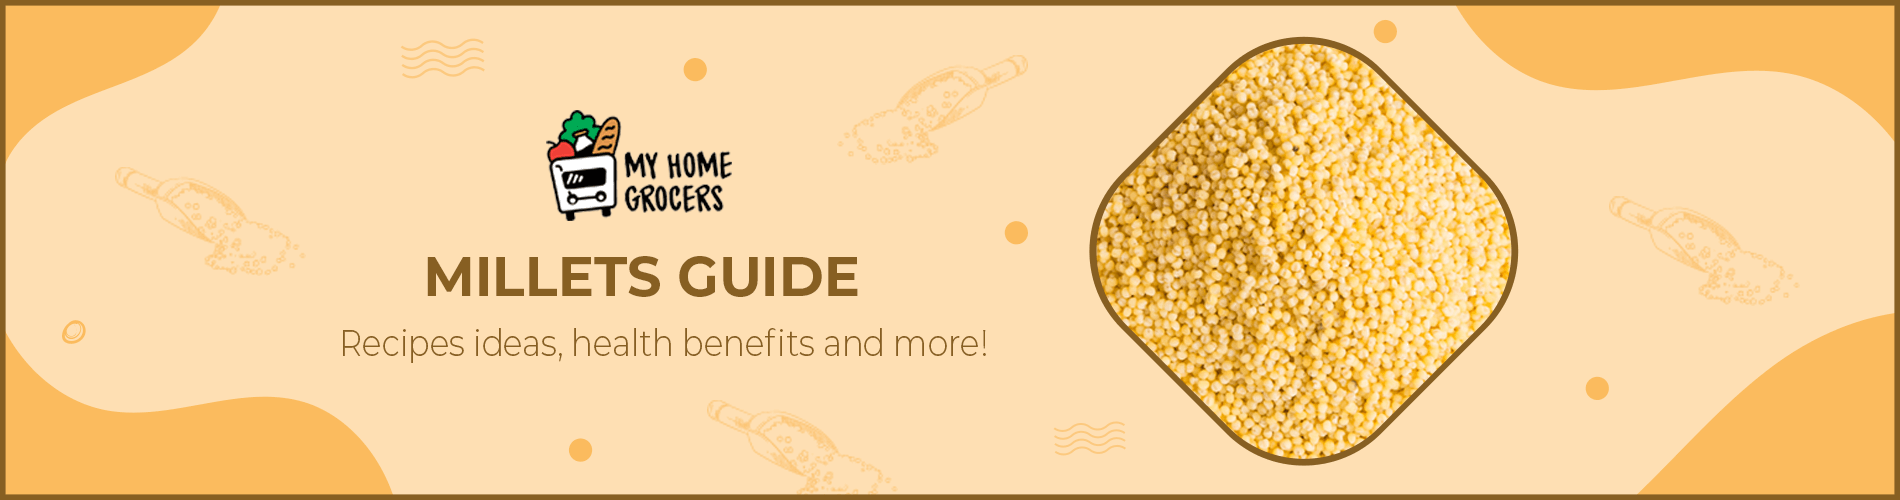 Millets guide- Recipes ideas, health benefits and more!